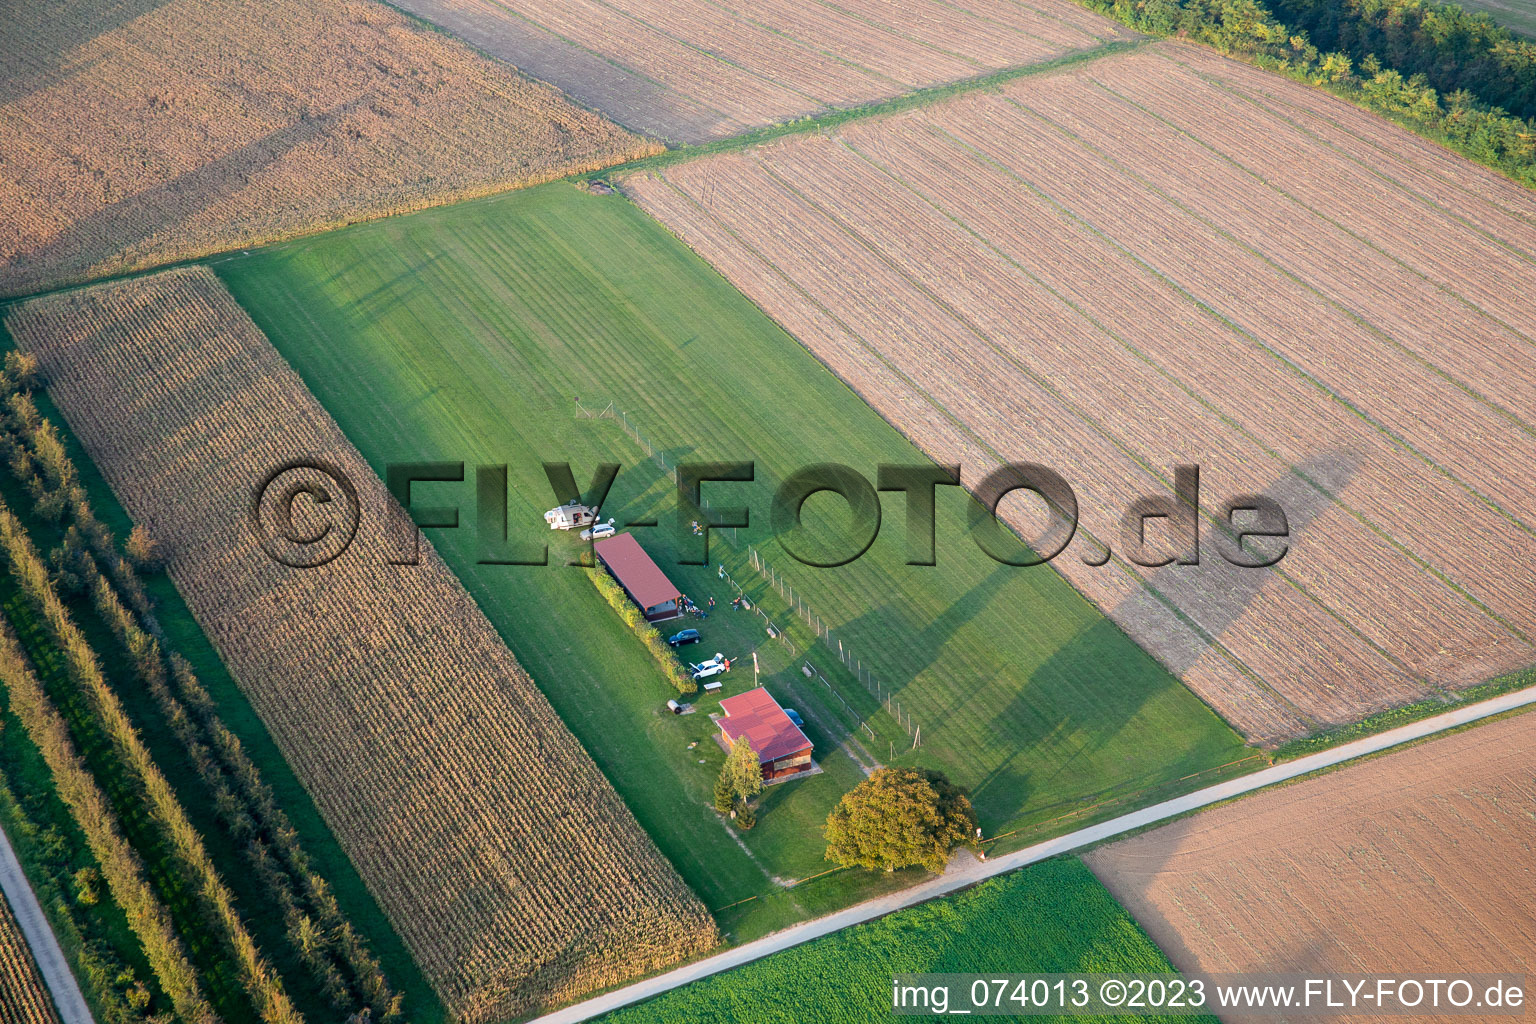 Oblique view of Model airfield in Freckenfeld in the state Rhineland-Palatinate, Germany